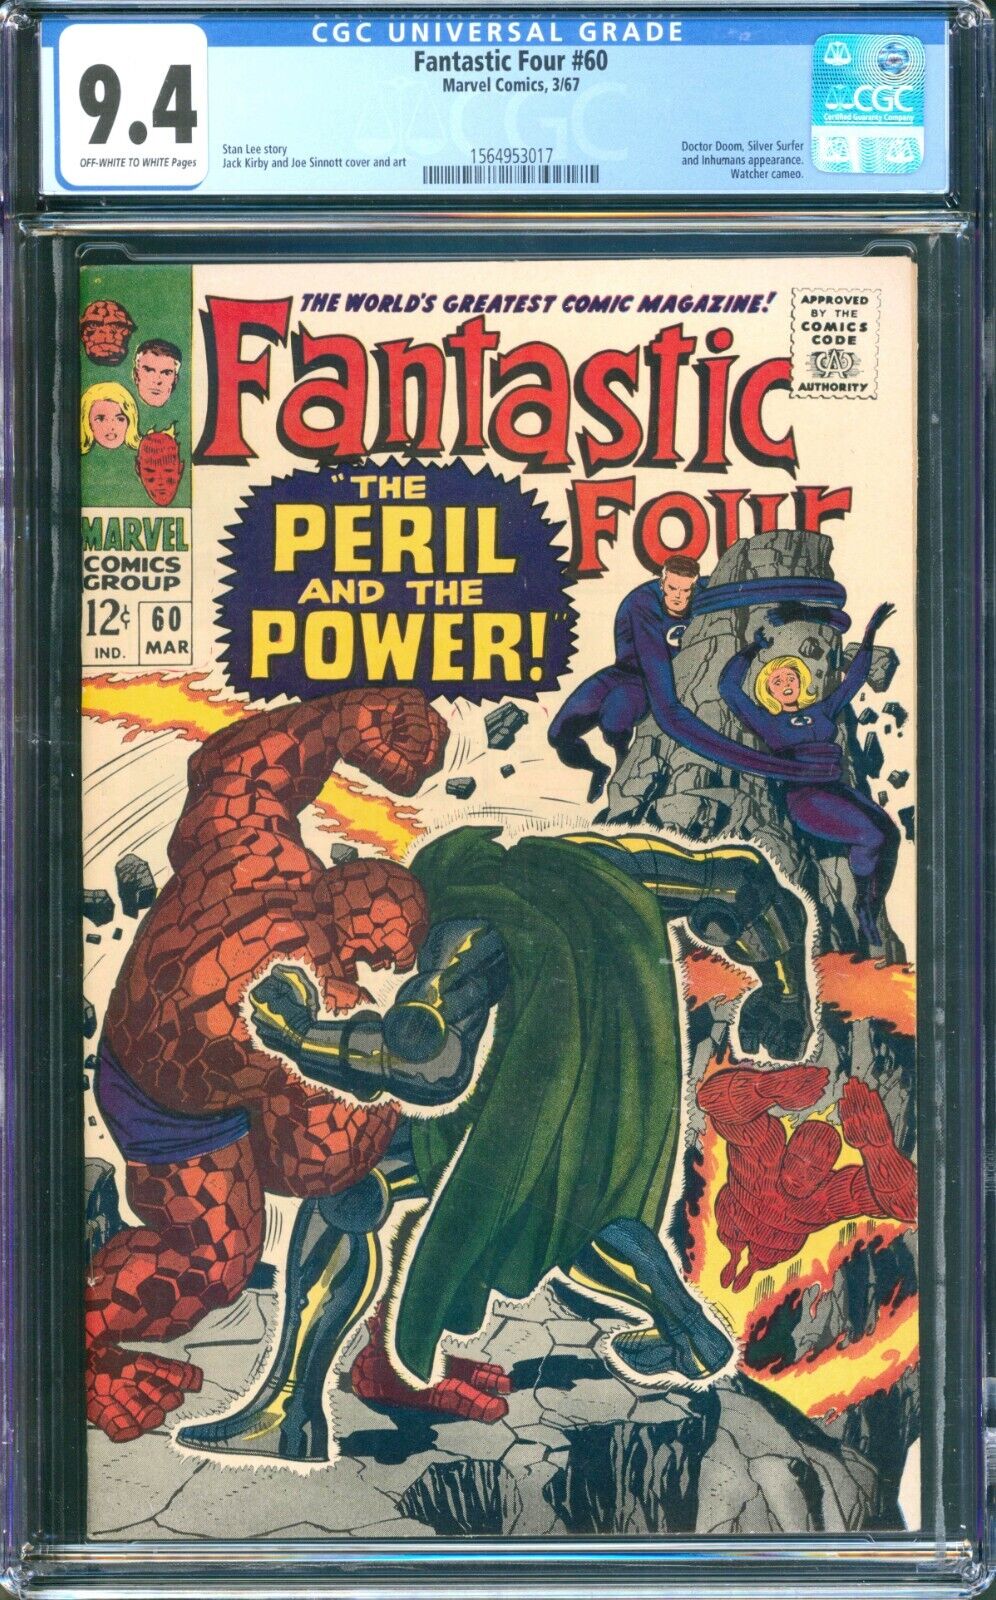 FANTASTIC FOUR #60 CGC  9.4 NM   NICE OFF WHITE/WHITE PAGES  GREAT EYE APPEAL